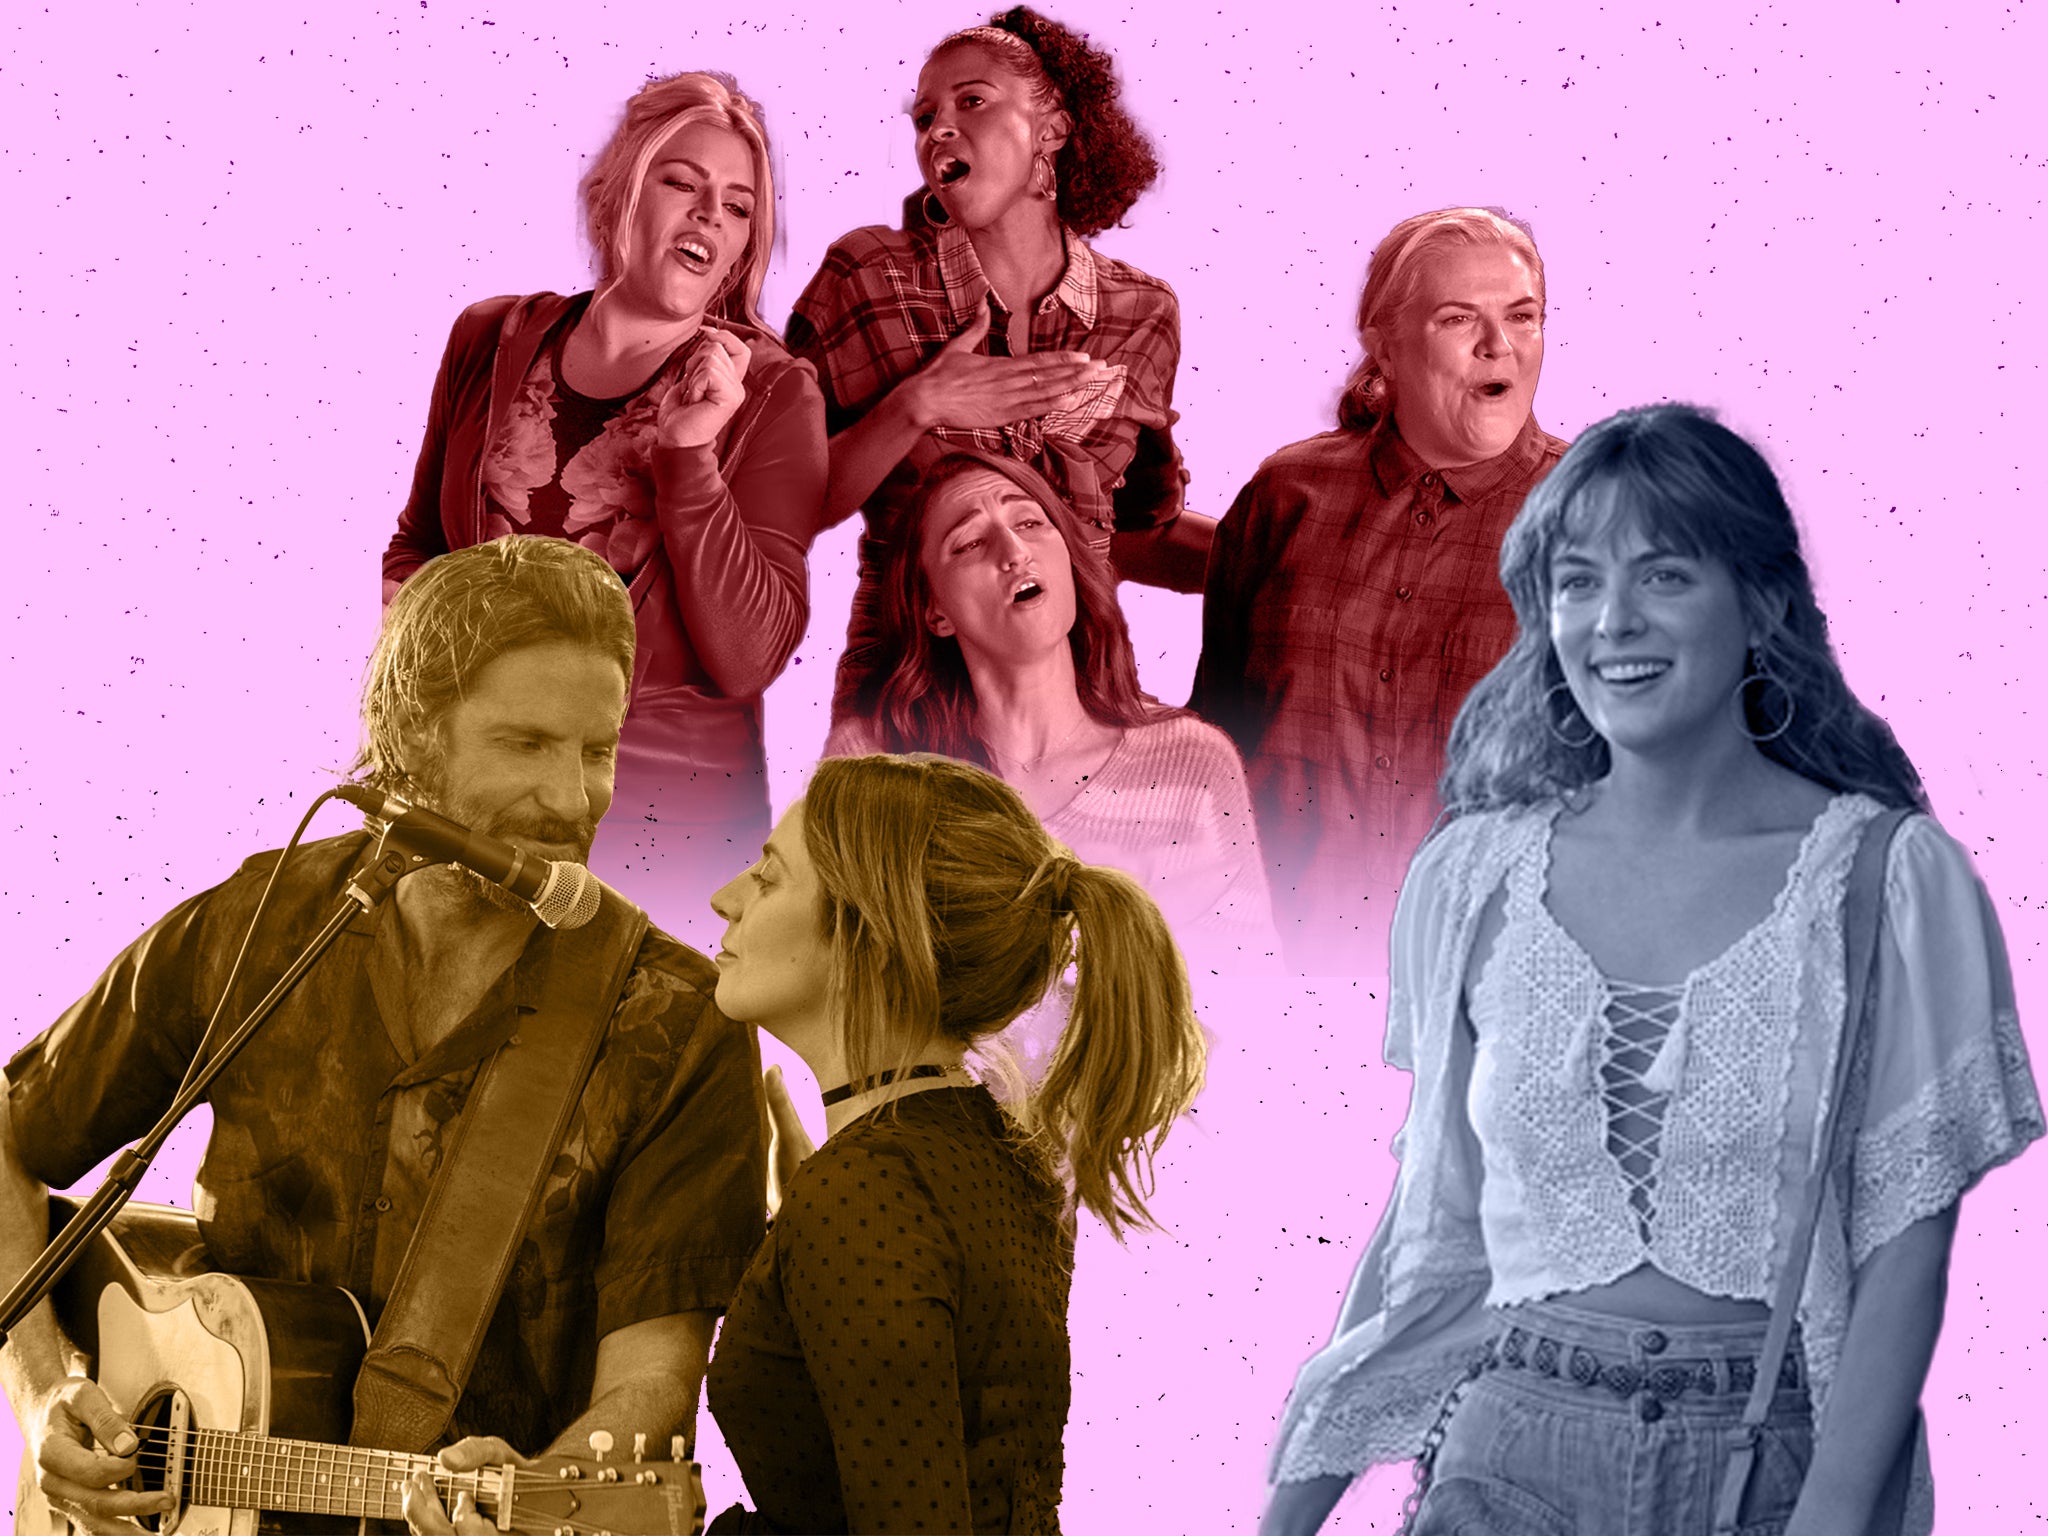 The all-singing stars of ‘A Star is Born’, ‘Girls5Eva’ and ‘Daisy Jones & The Six’